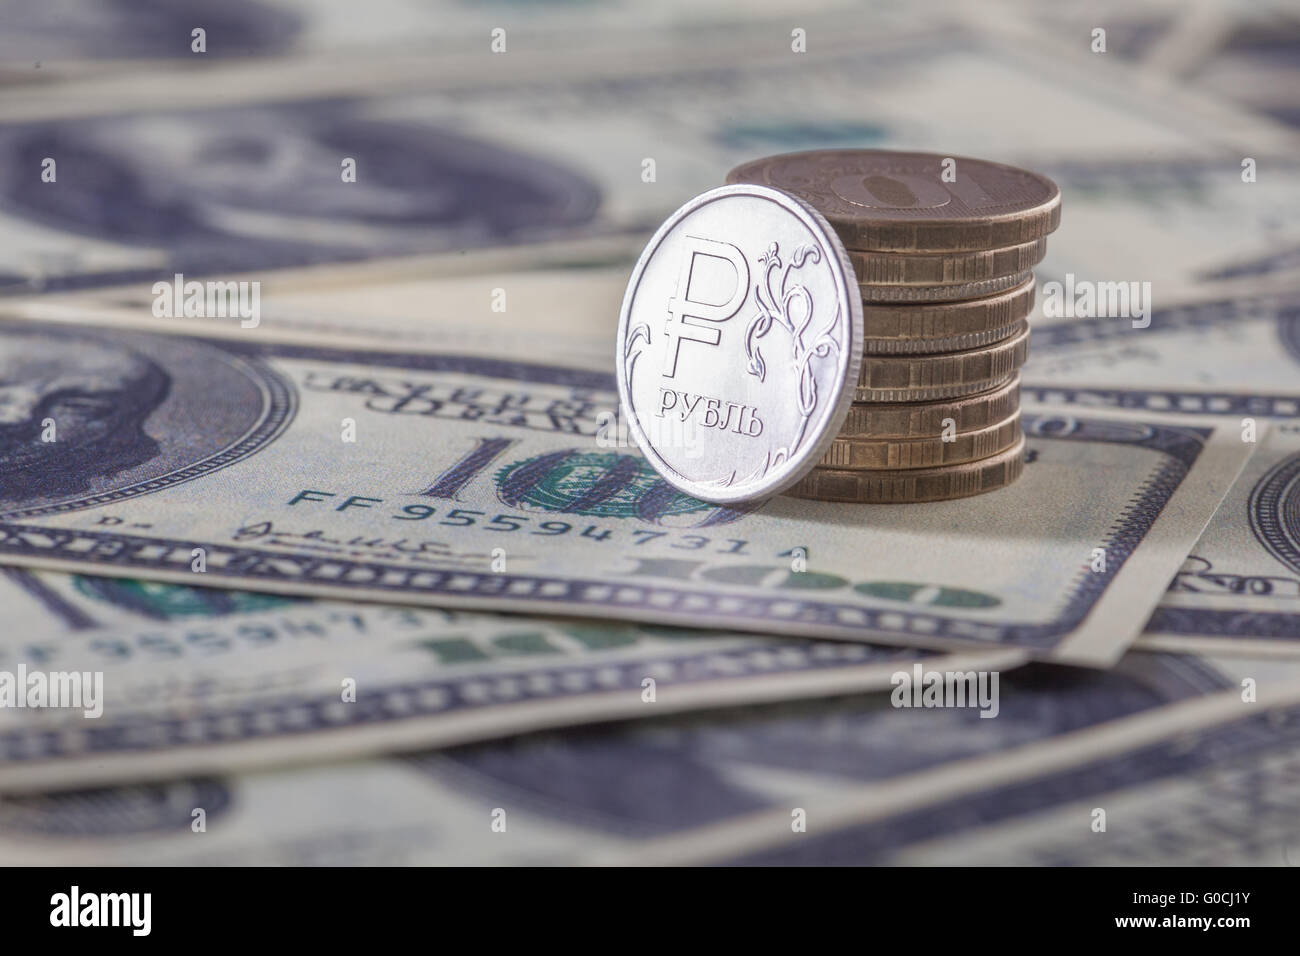 New russian ruble coin and american dollars Stock Photo